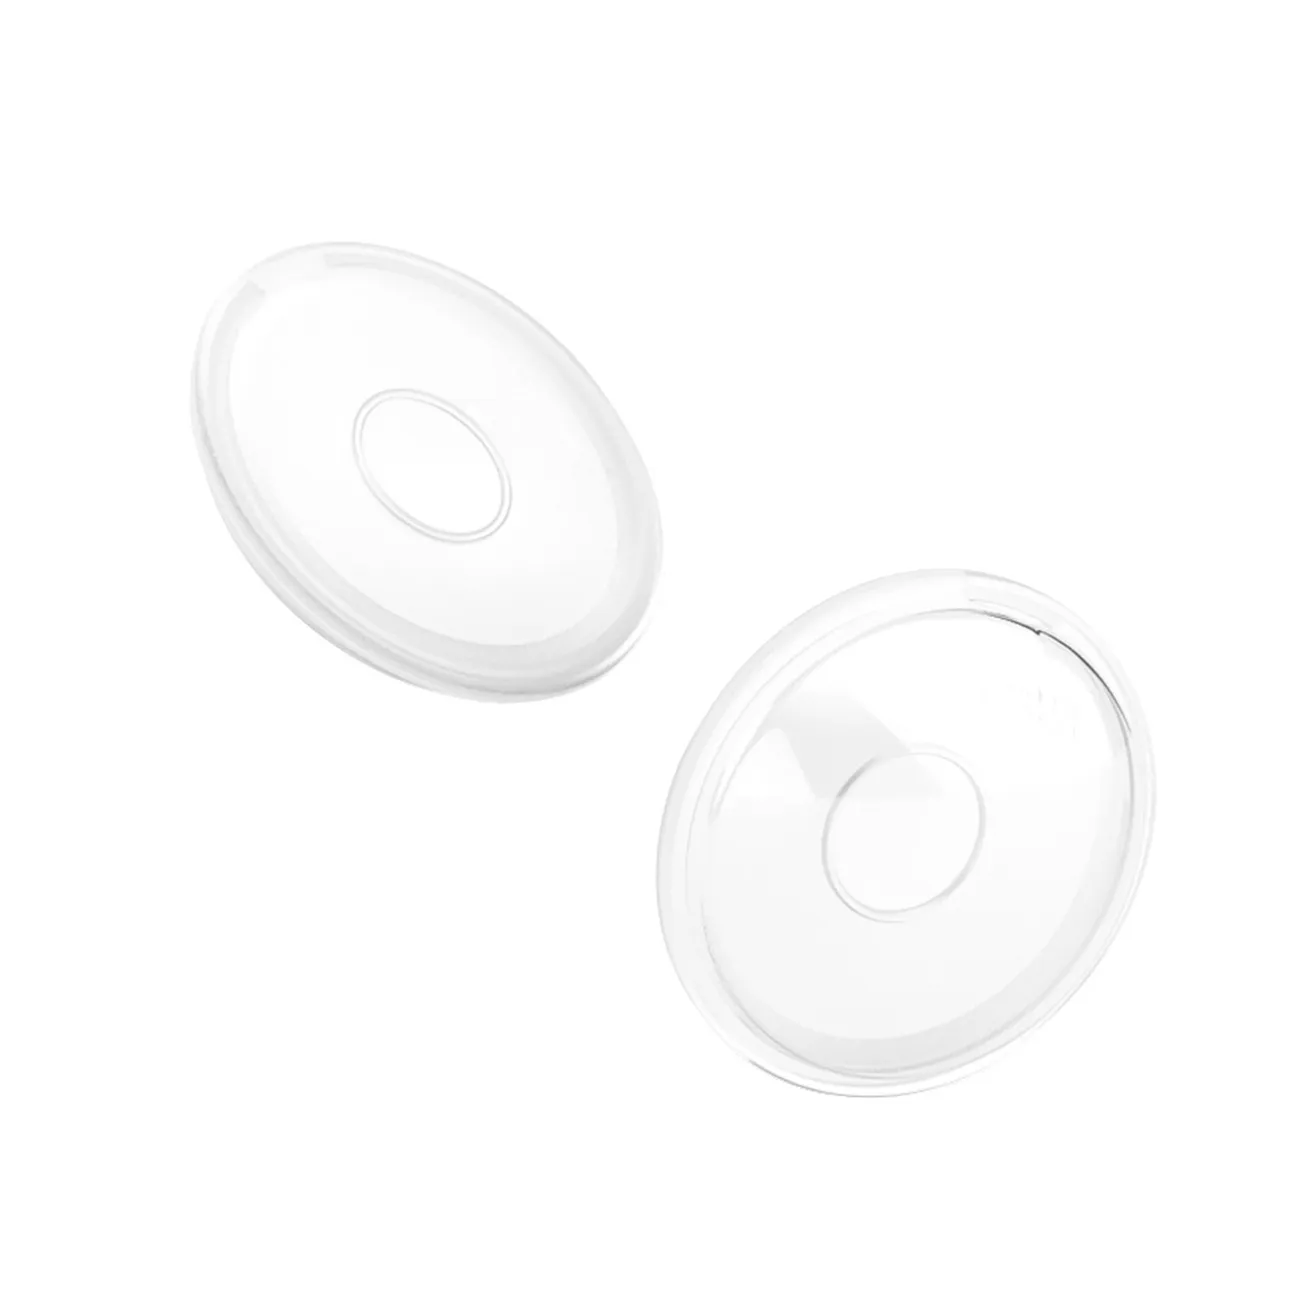 2-pack Reusable Comfort Breast Shells for Breastfeeding Relief & Protect  Cracked Sore Nipples & Collect Leaked Breast Milk Only د.ب.‏ 4.31 بات بات  Mobile